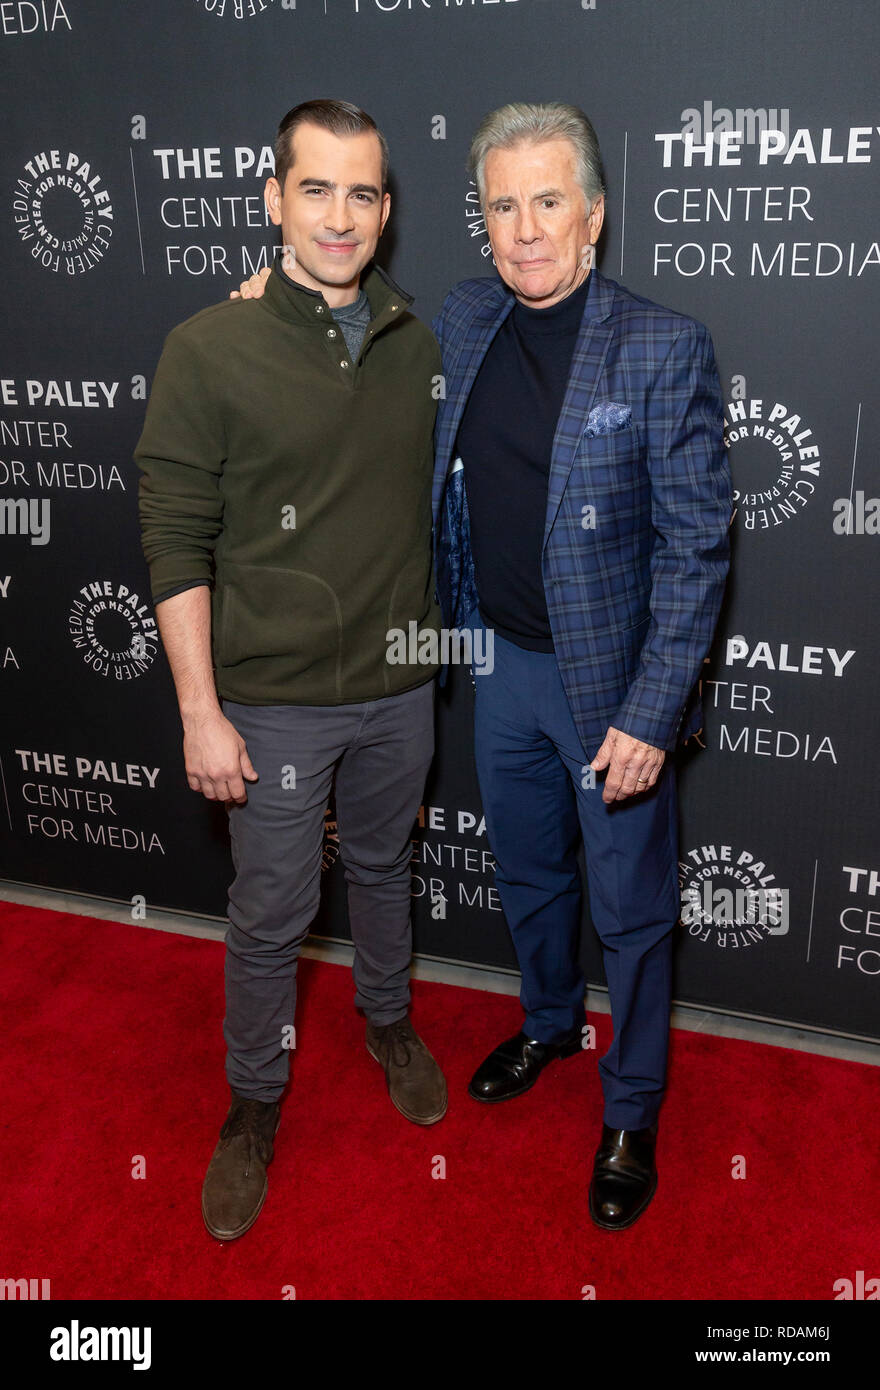 New York, United States. 16th Jan, 2019. Callahan Walsh and John Walsh attend In Pursuit With John Walsh Screening & Conversation at The Paley Center for Media Credit: Lev Radin/Pacific Press/Alamy Live News Stock Photo